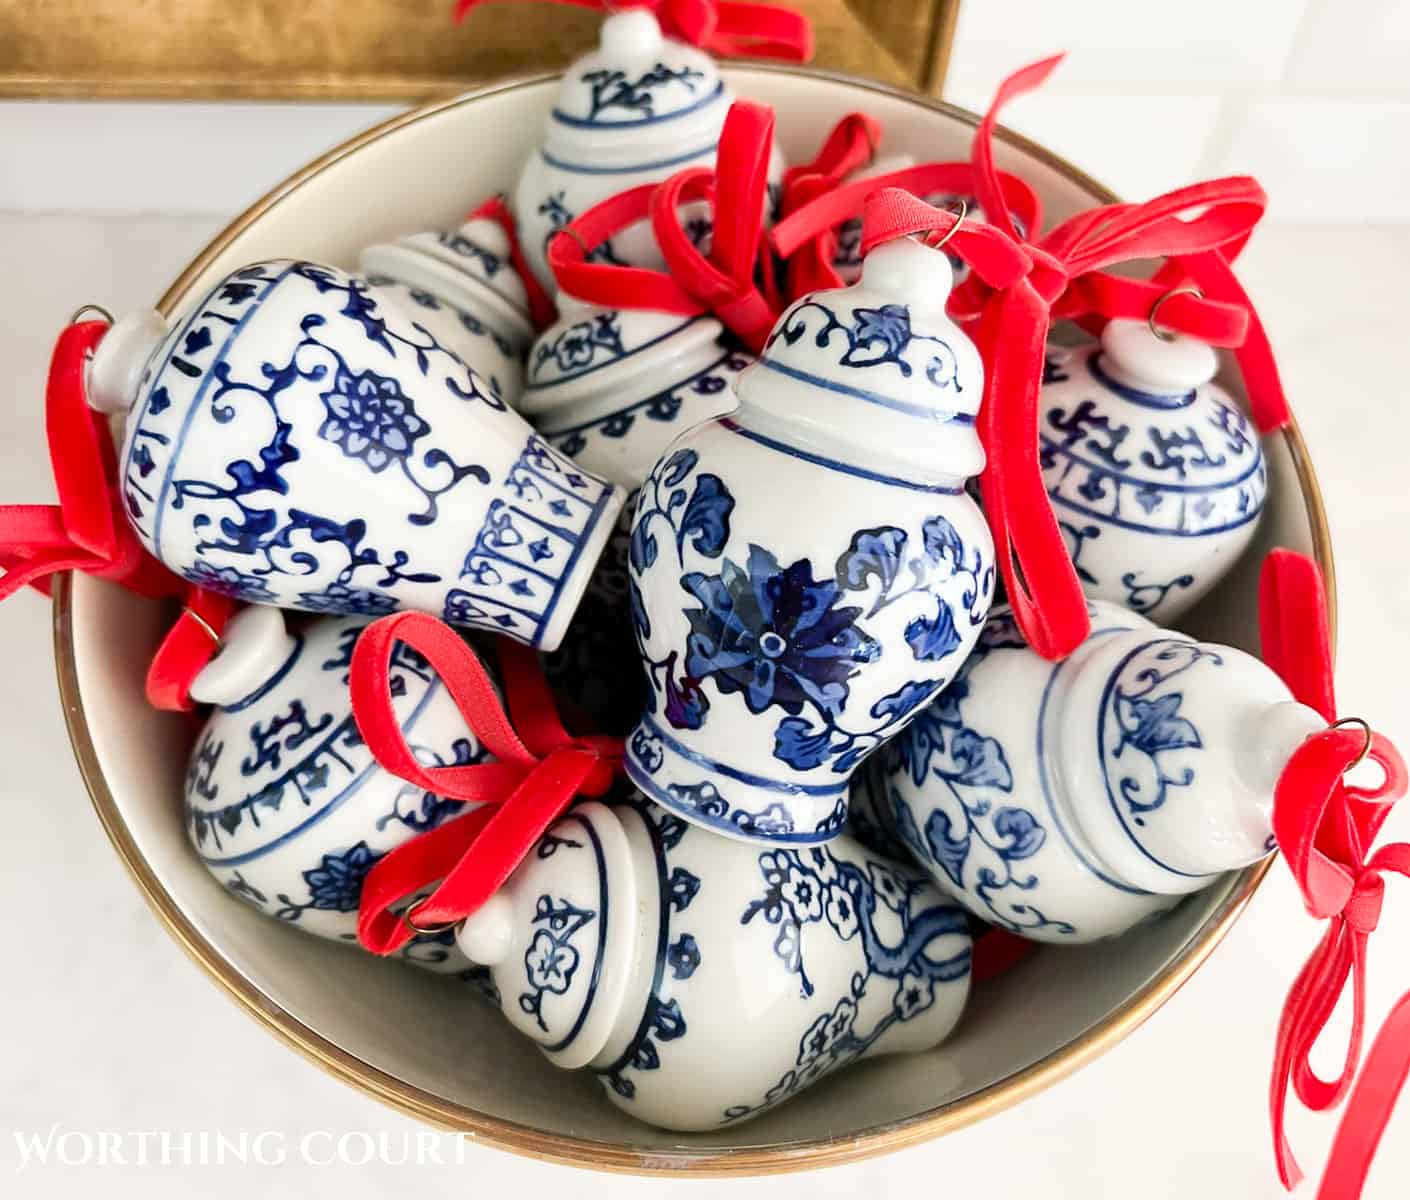 bowl filled with minature blue and white ginger jar Christmas ornaments with red velvet ribbon bows